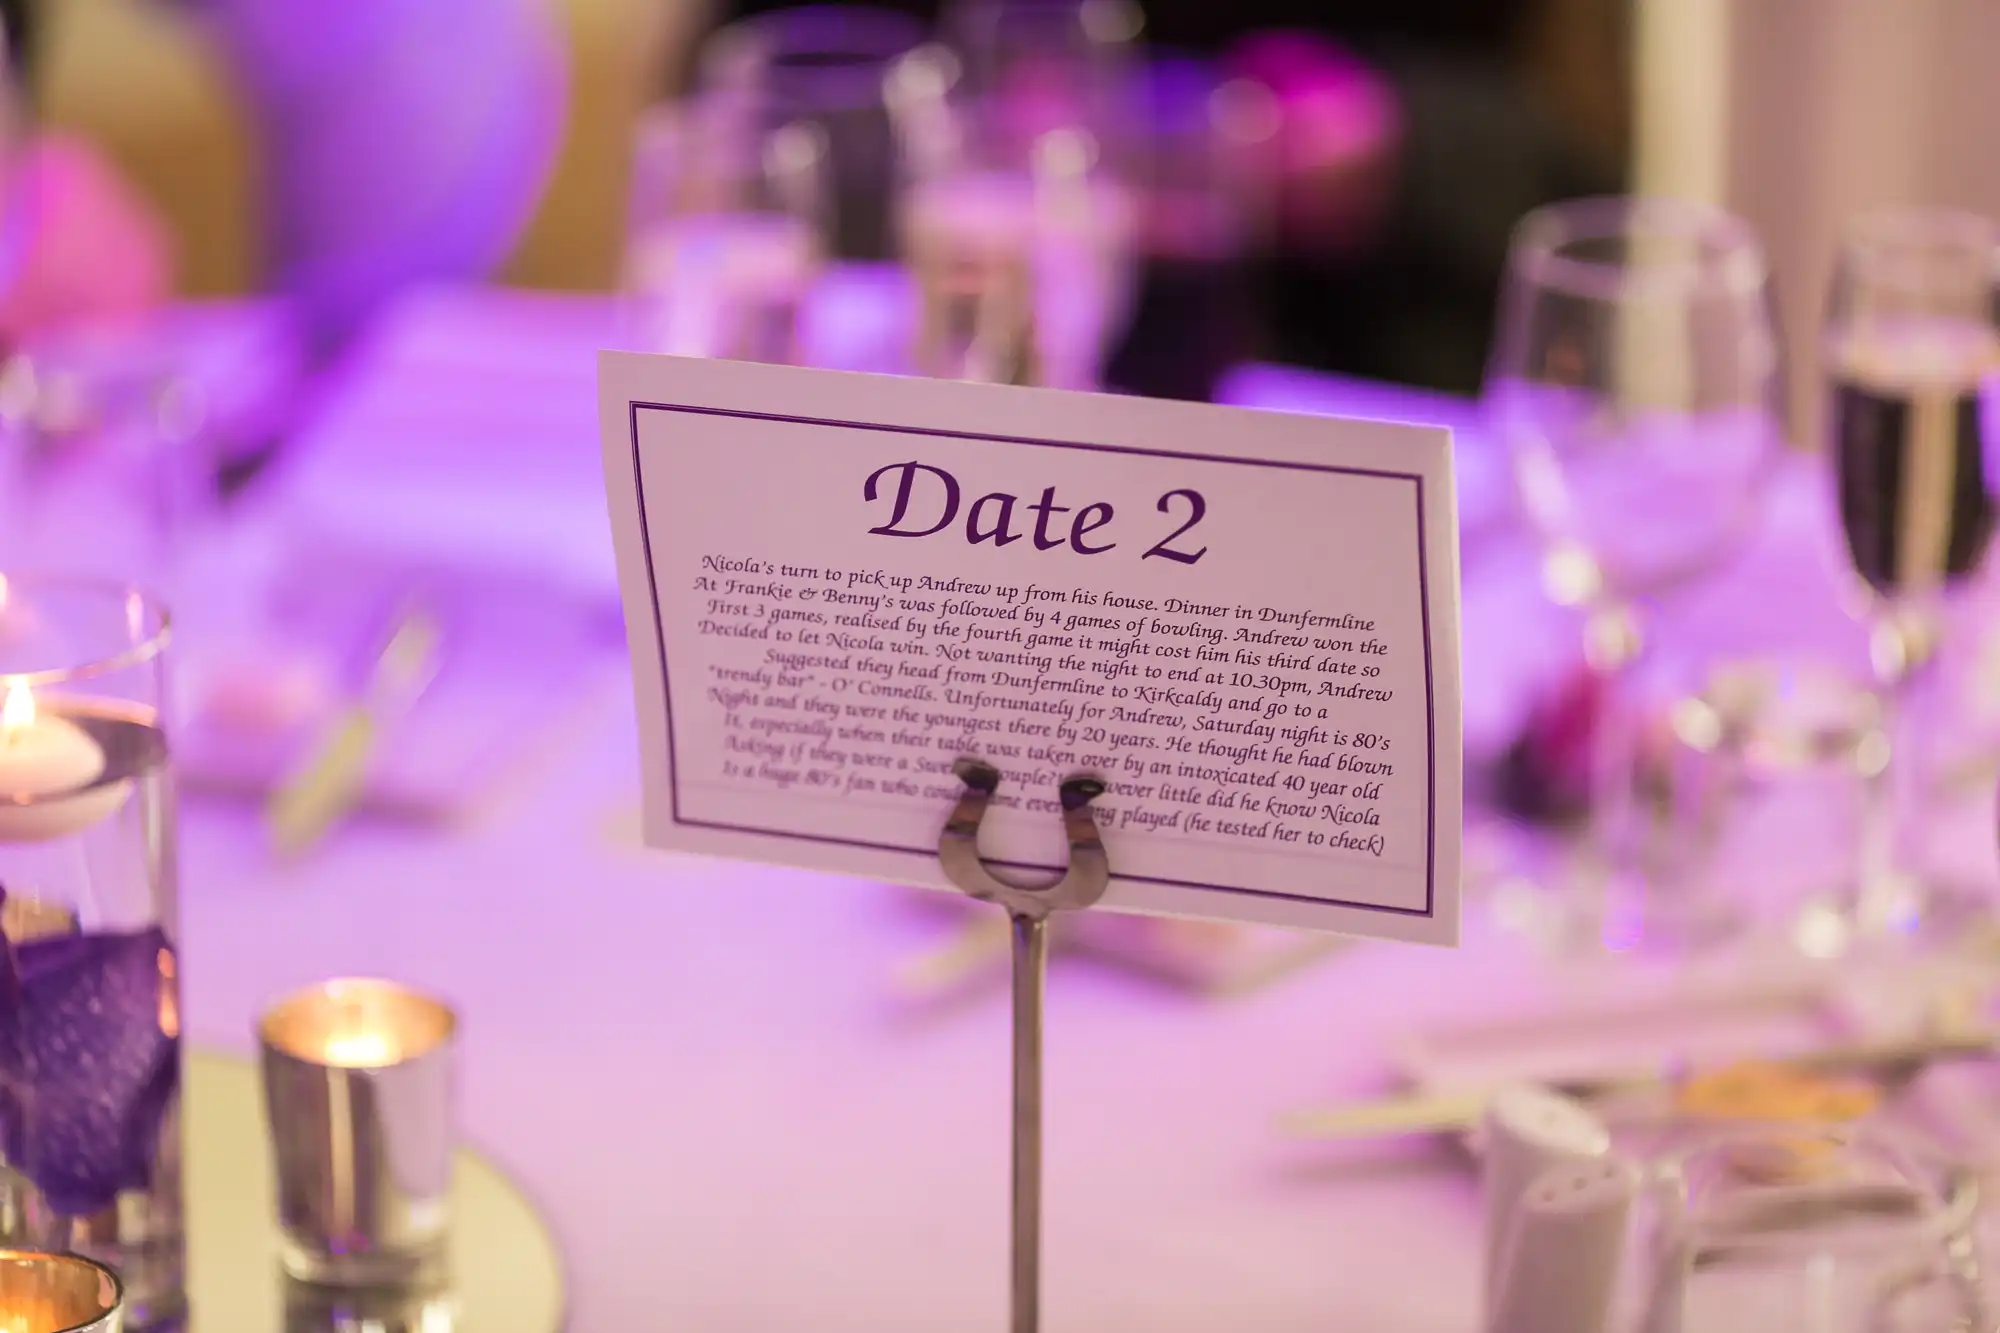 Table setting with a "date 2" placard, candles, and wine glasses at a dimly lit event.